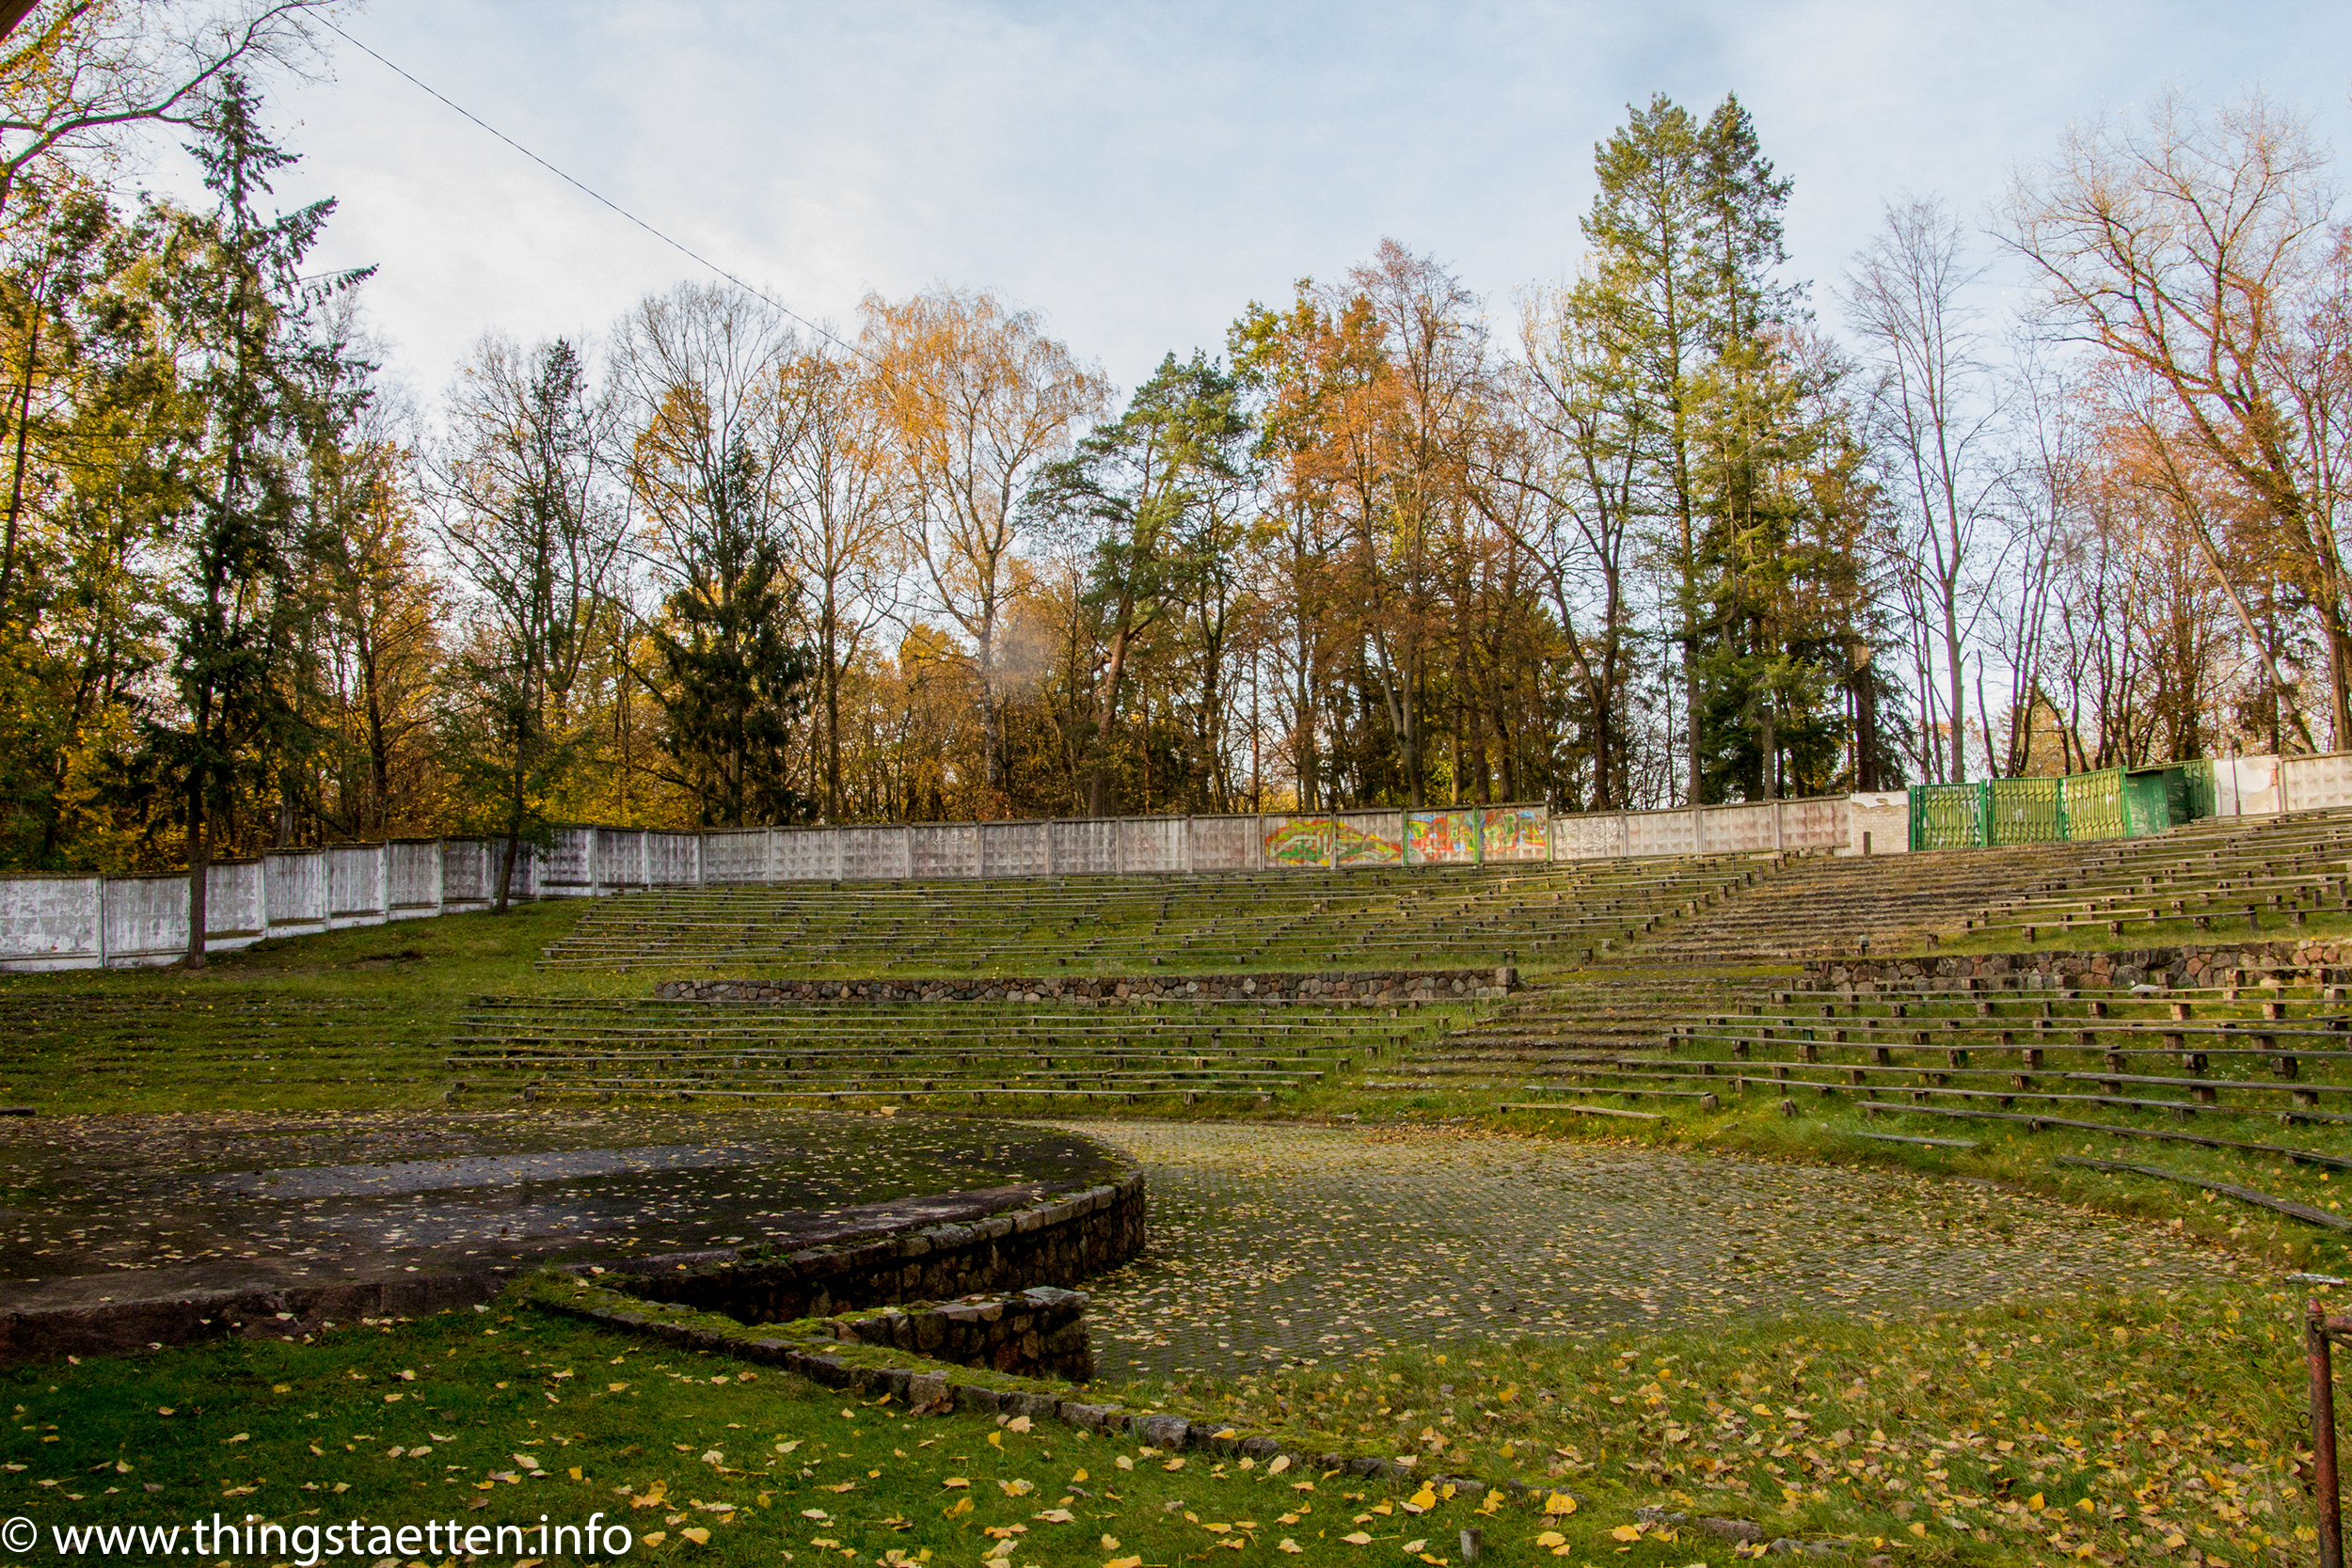 Tribune of the former open-air theater - history of theater of National Socialism - Sowetsk (Tilsit), East Prussia